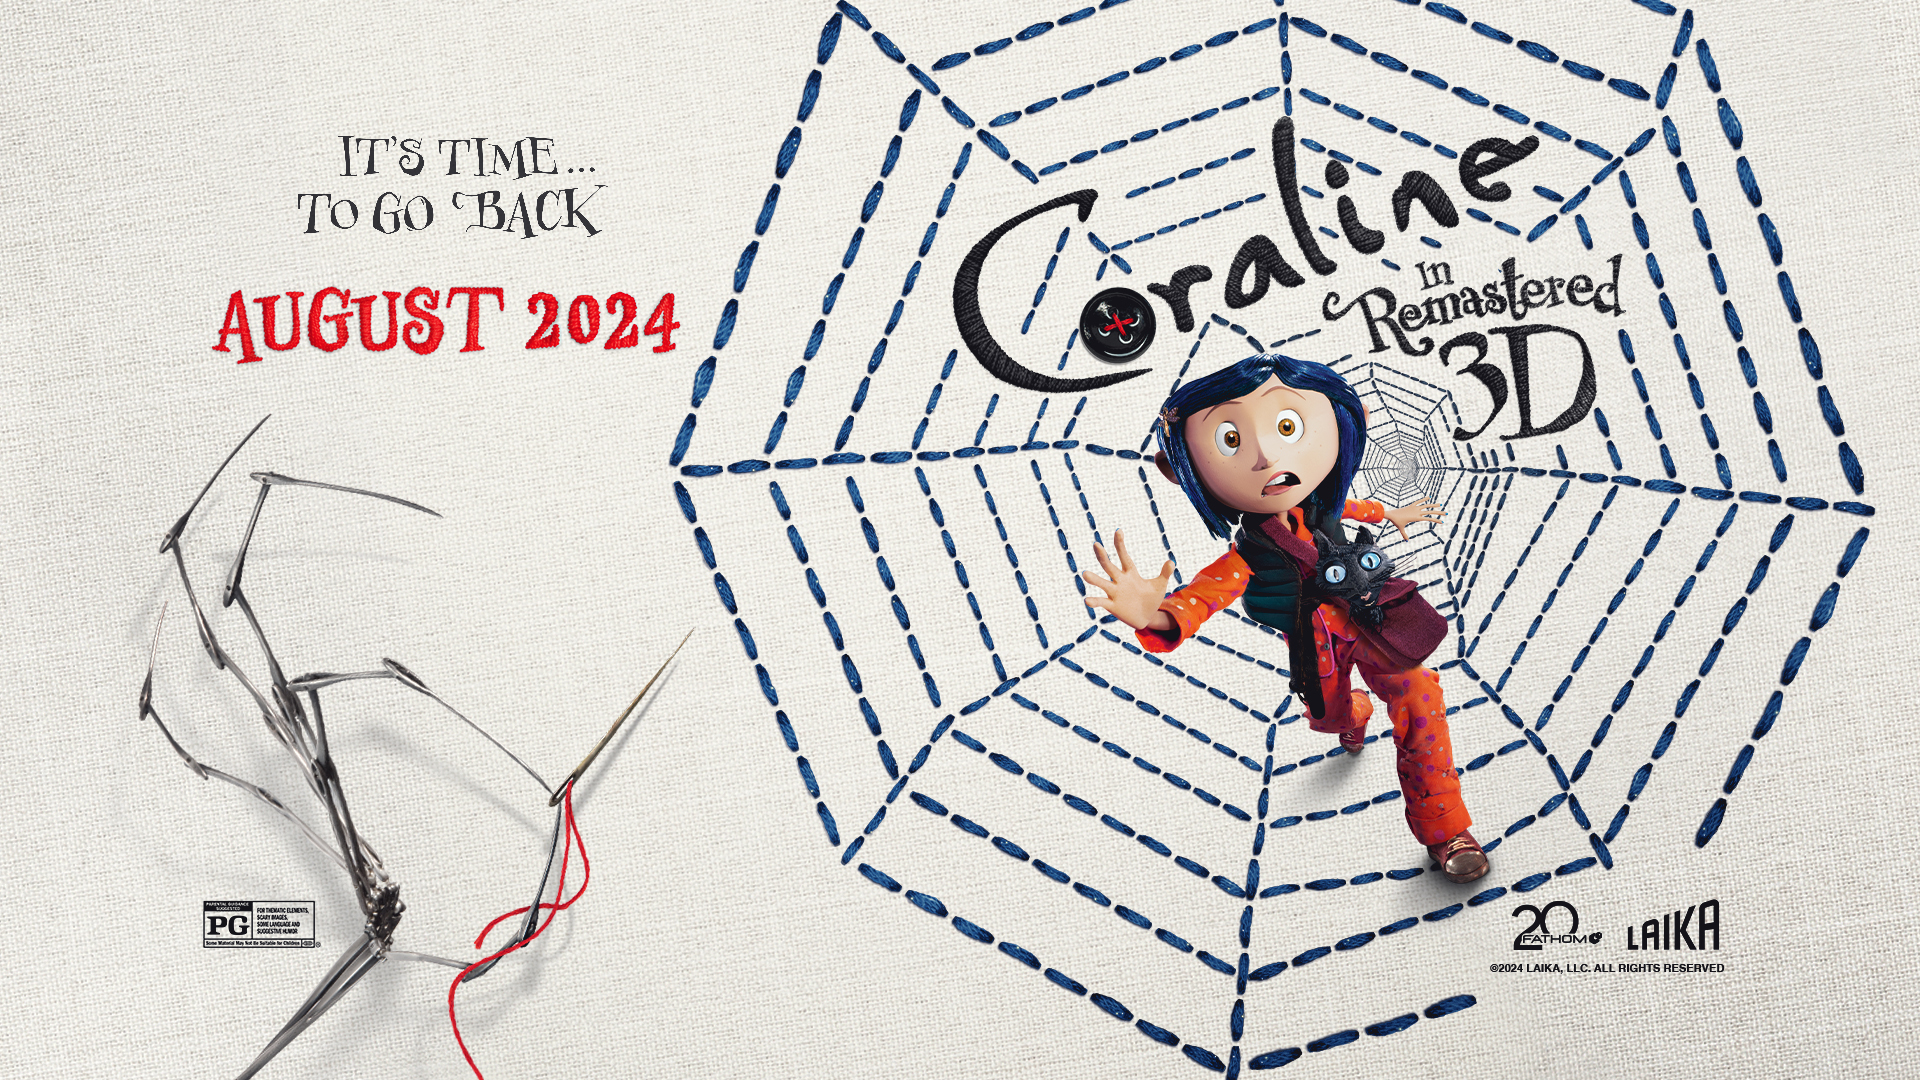 TICKETS ARE ON SALE NOW FOR THE NEWLY REMASTERED 3D CORALINE COMING BACK TO THEATERS TO CELEBRATE ITS 15th ANNIVERSARY